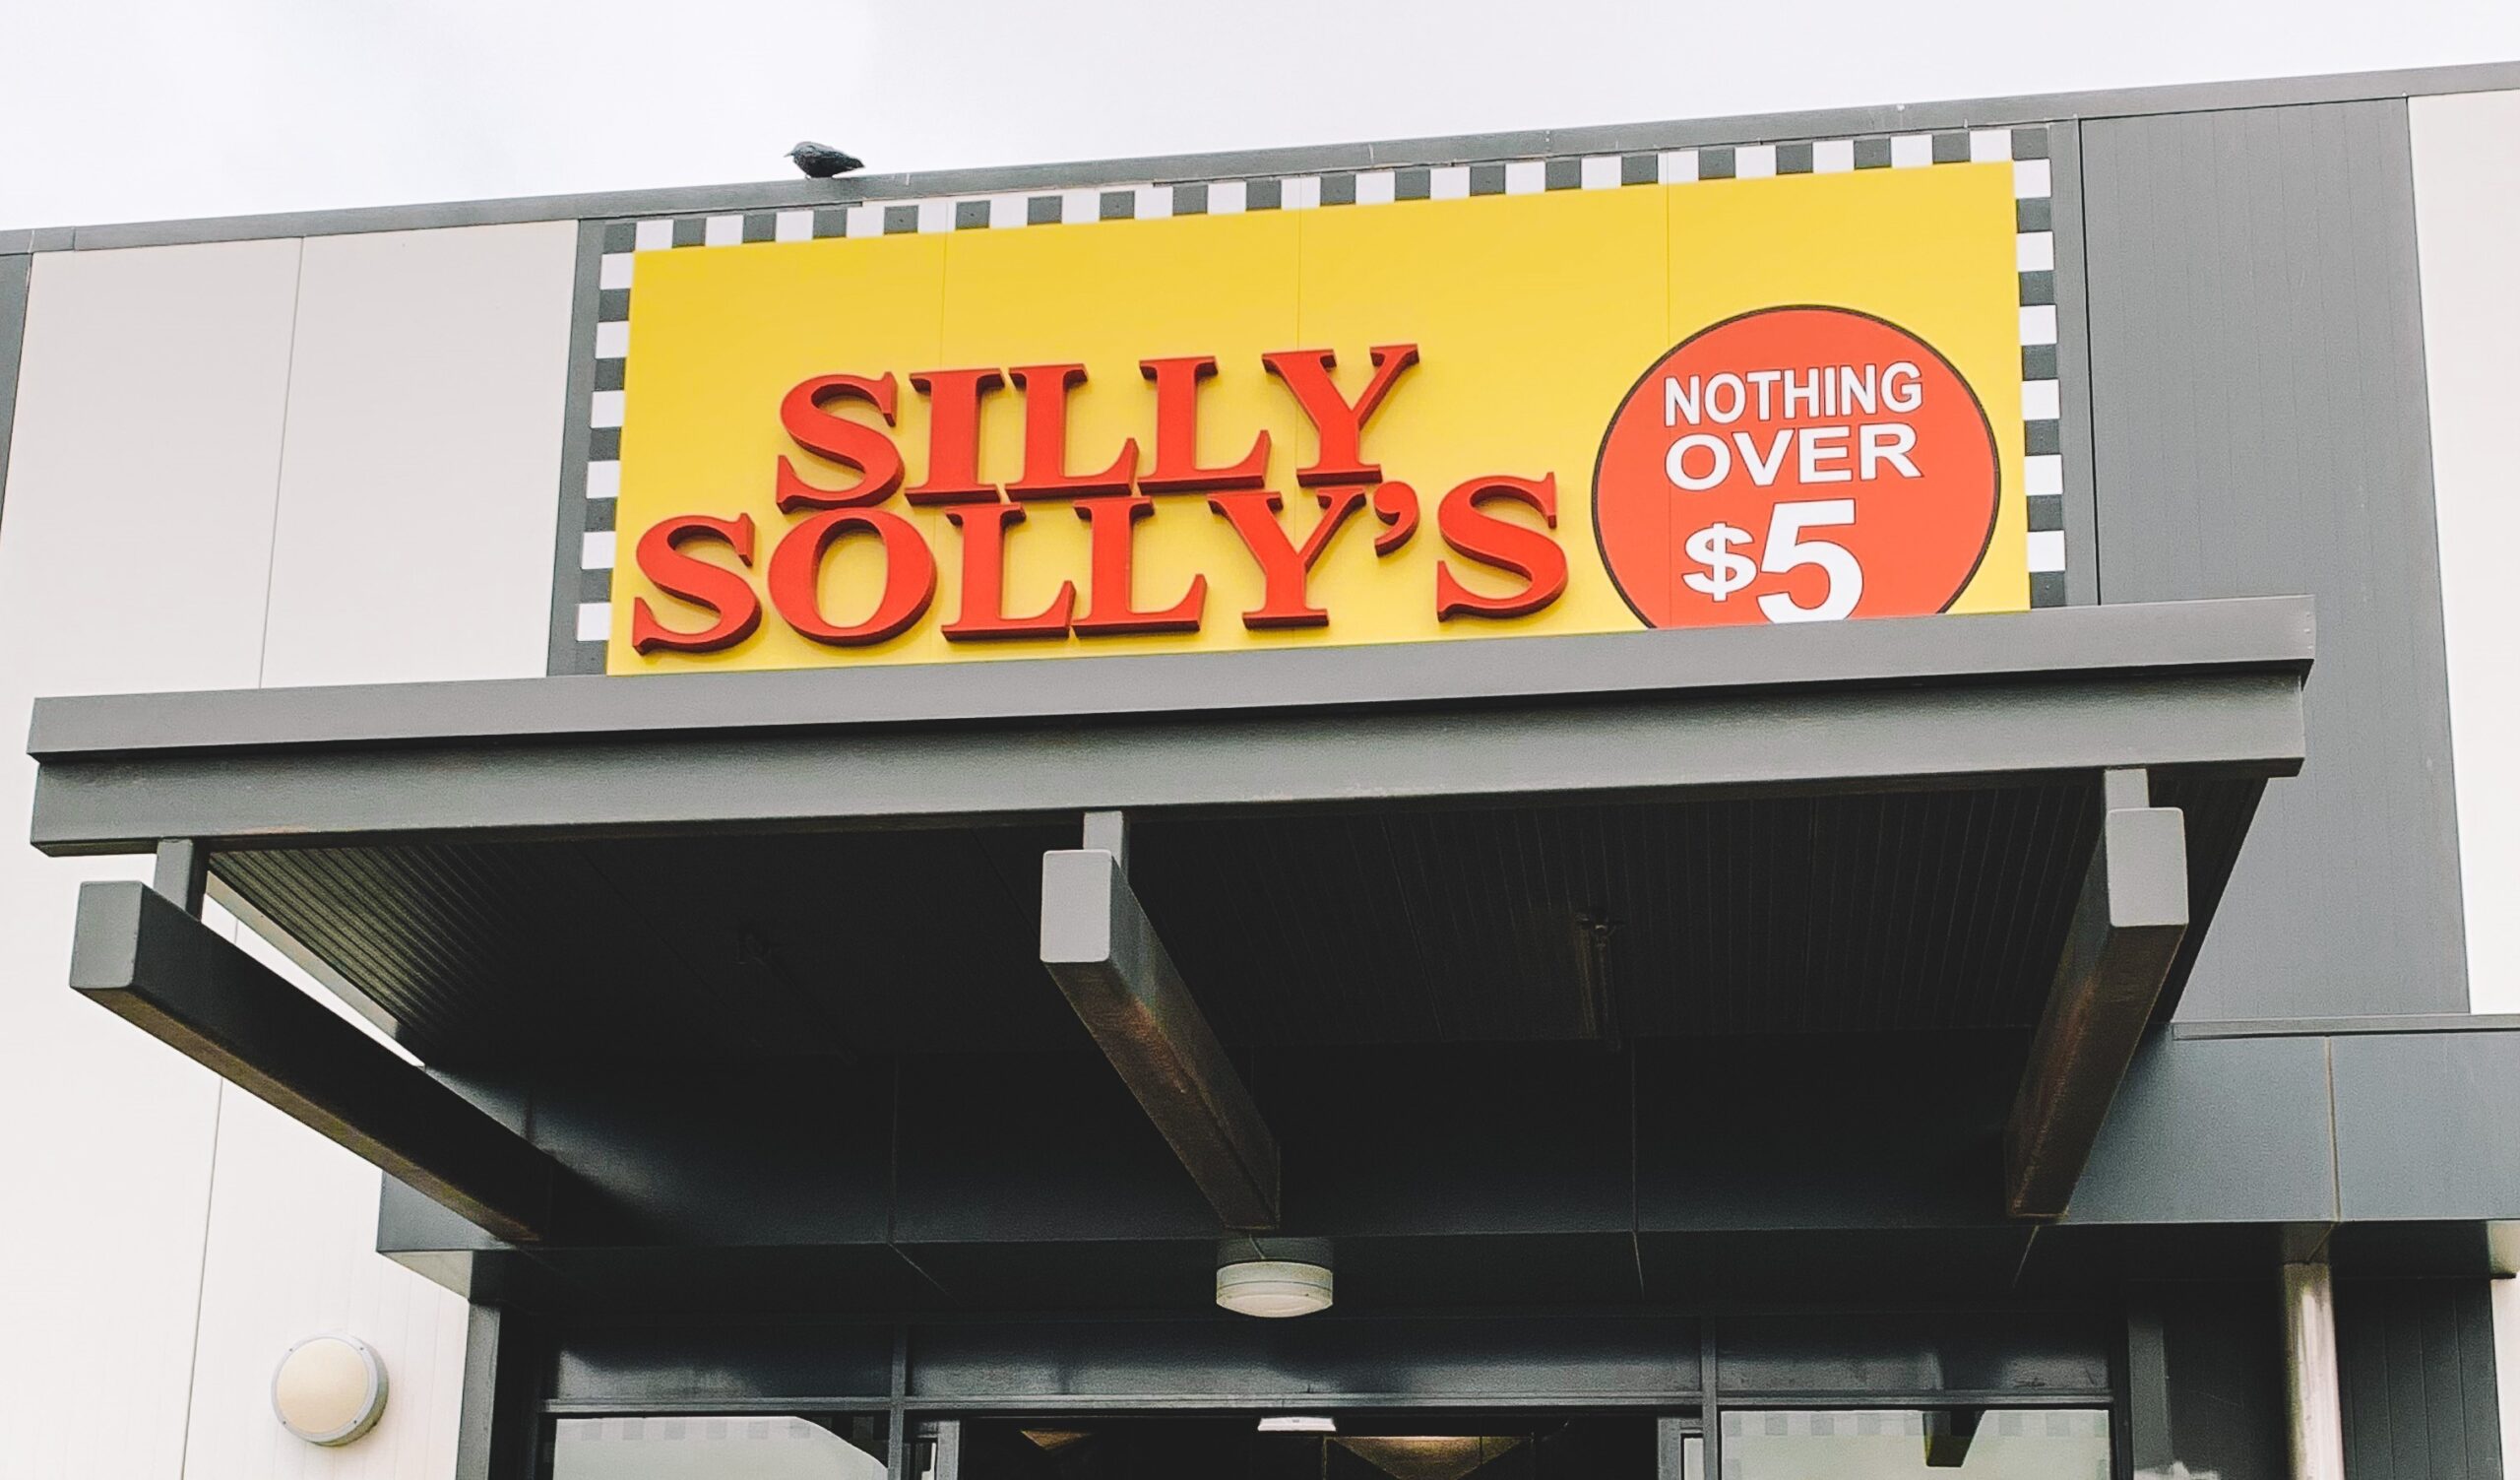 Silly Solly’s